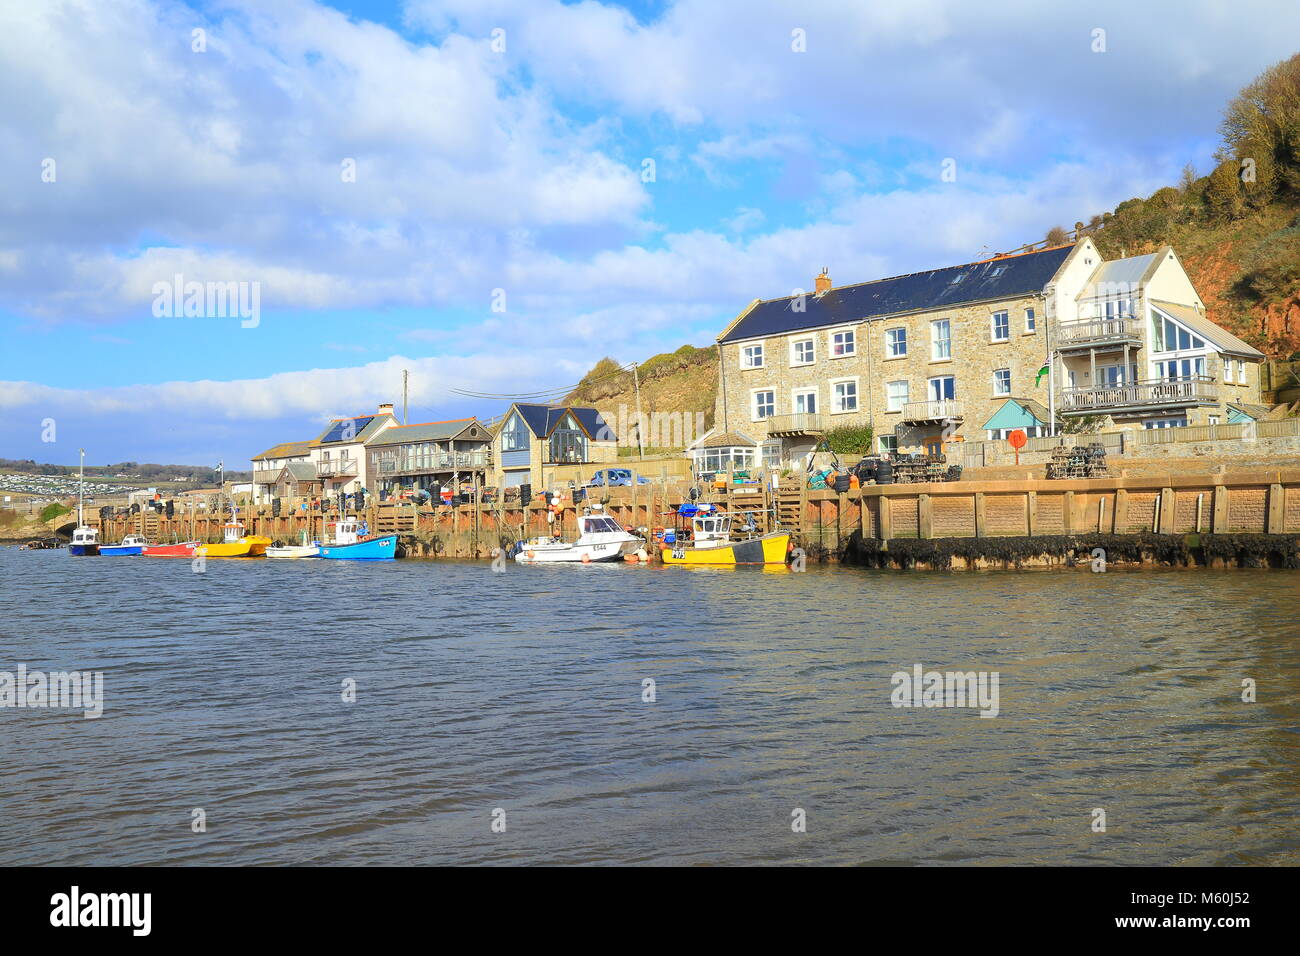 Colourful boats moored at Axmouth Harbour on the river Axe Estuary near town of Seaton in East Devon Stock Photo